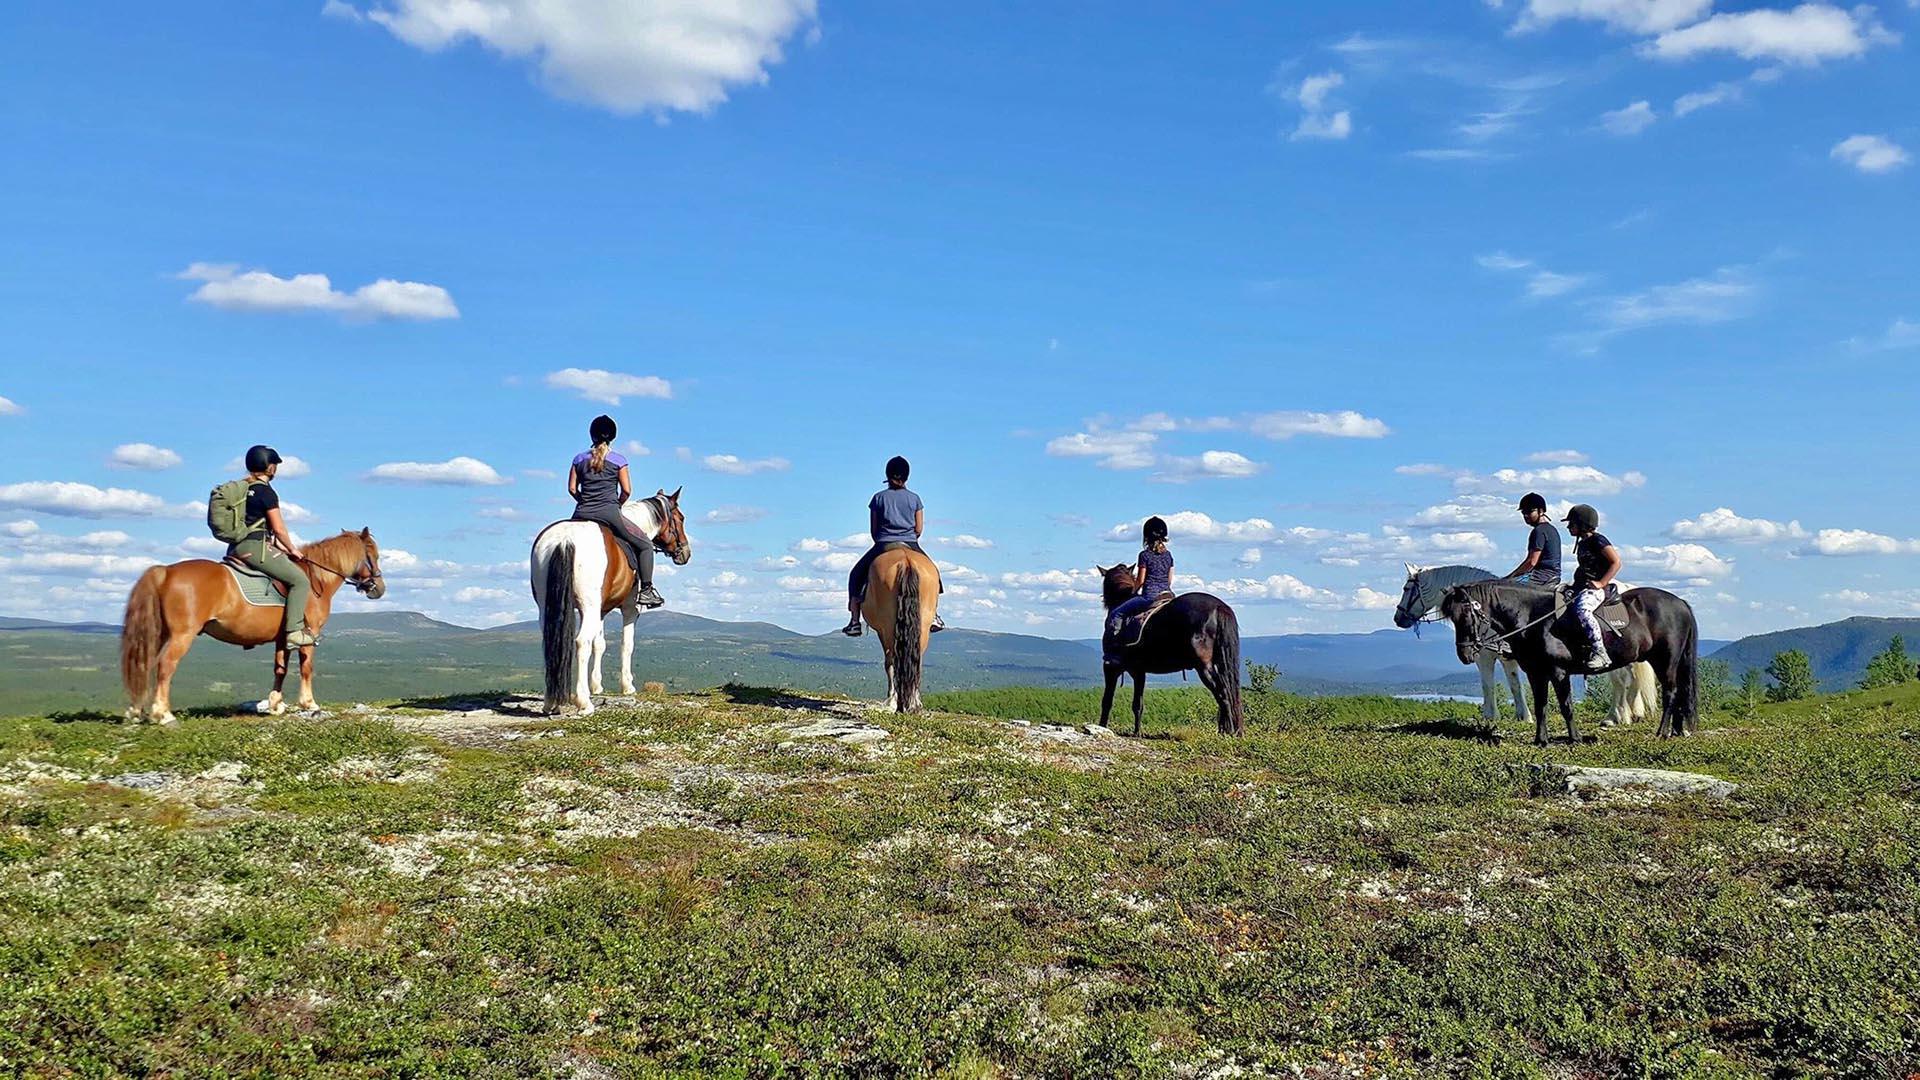 Six riders on horseback viewed from the rear look into mountain landscape